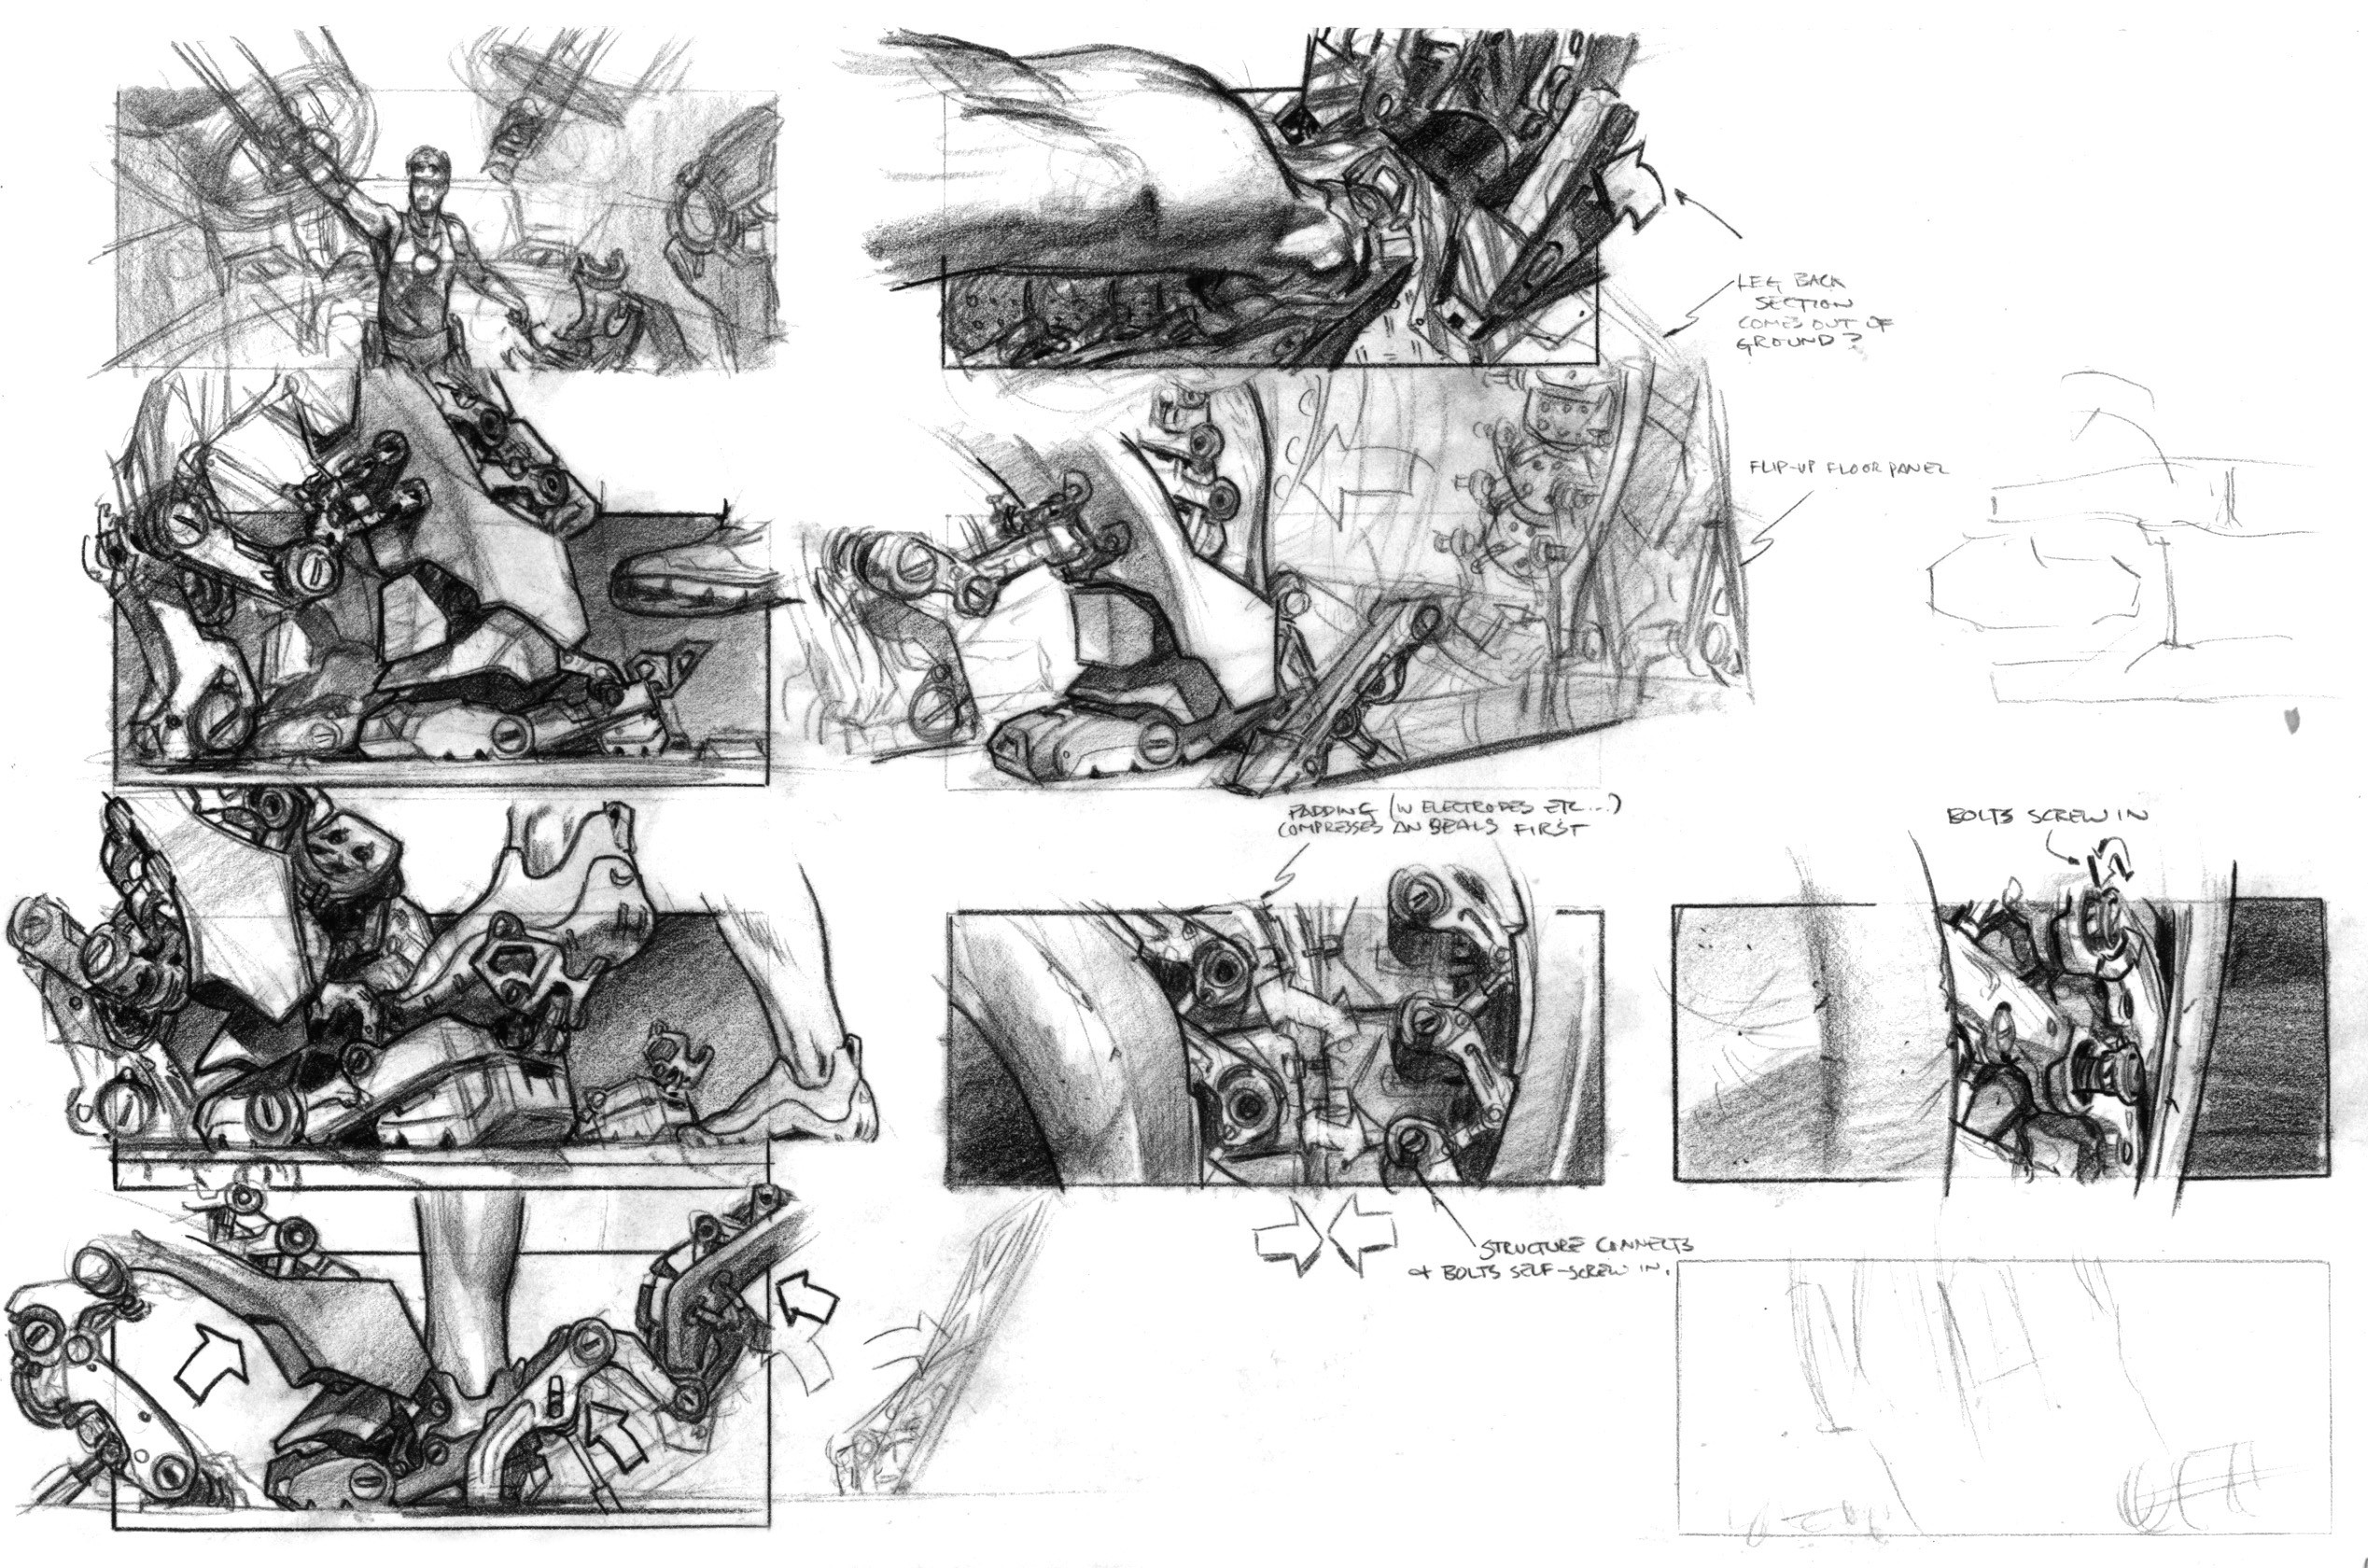 Suiting-up storyboards showing potential key shots in the suit-up sequence.(Pencil on vellum)